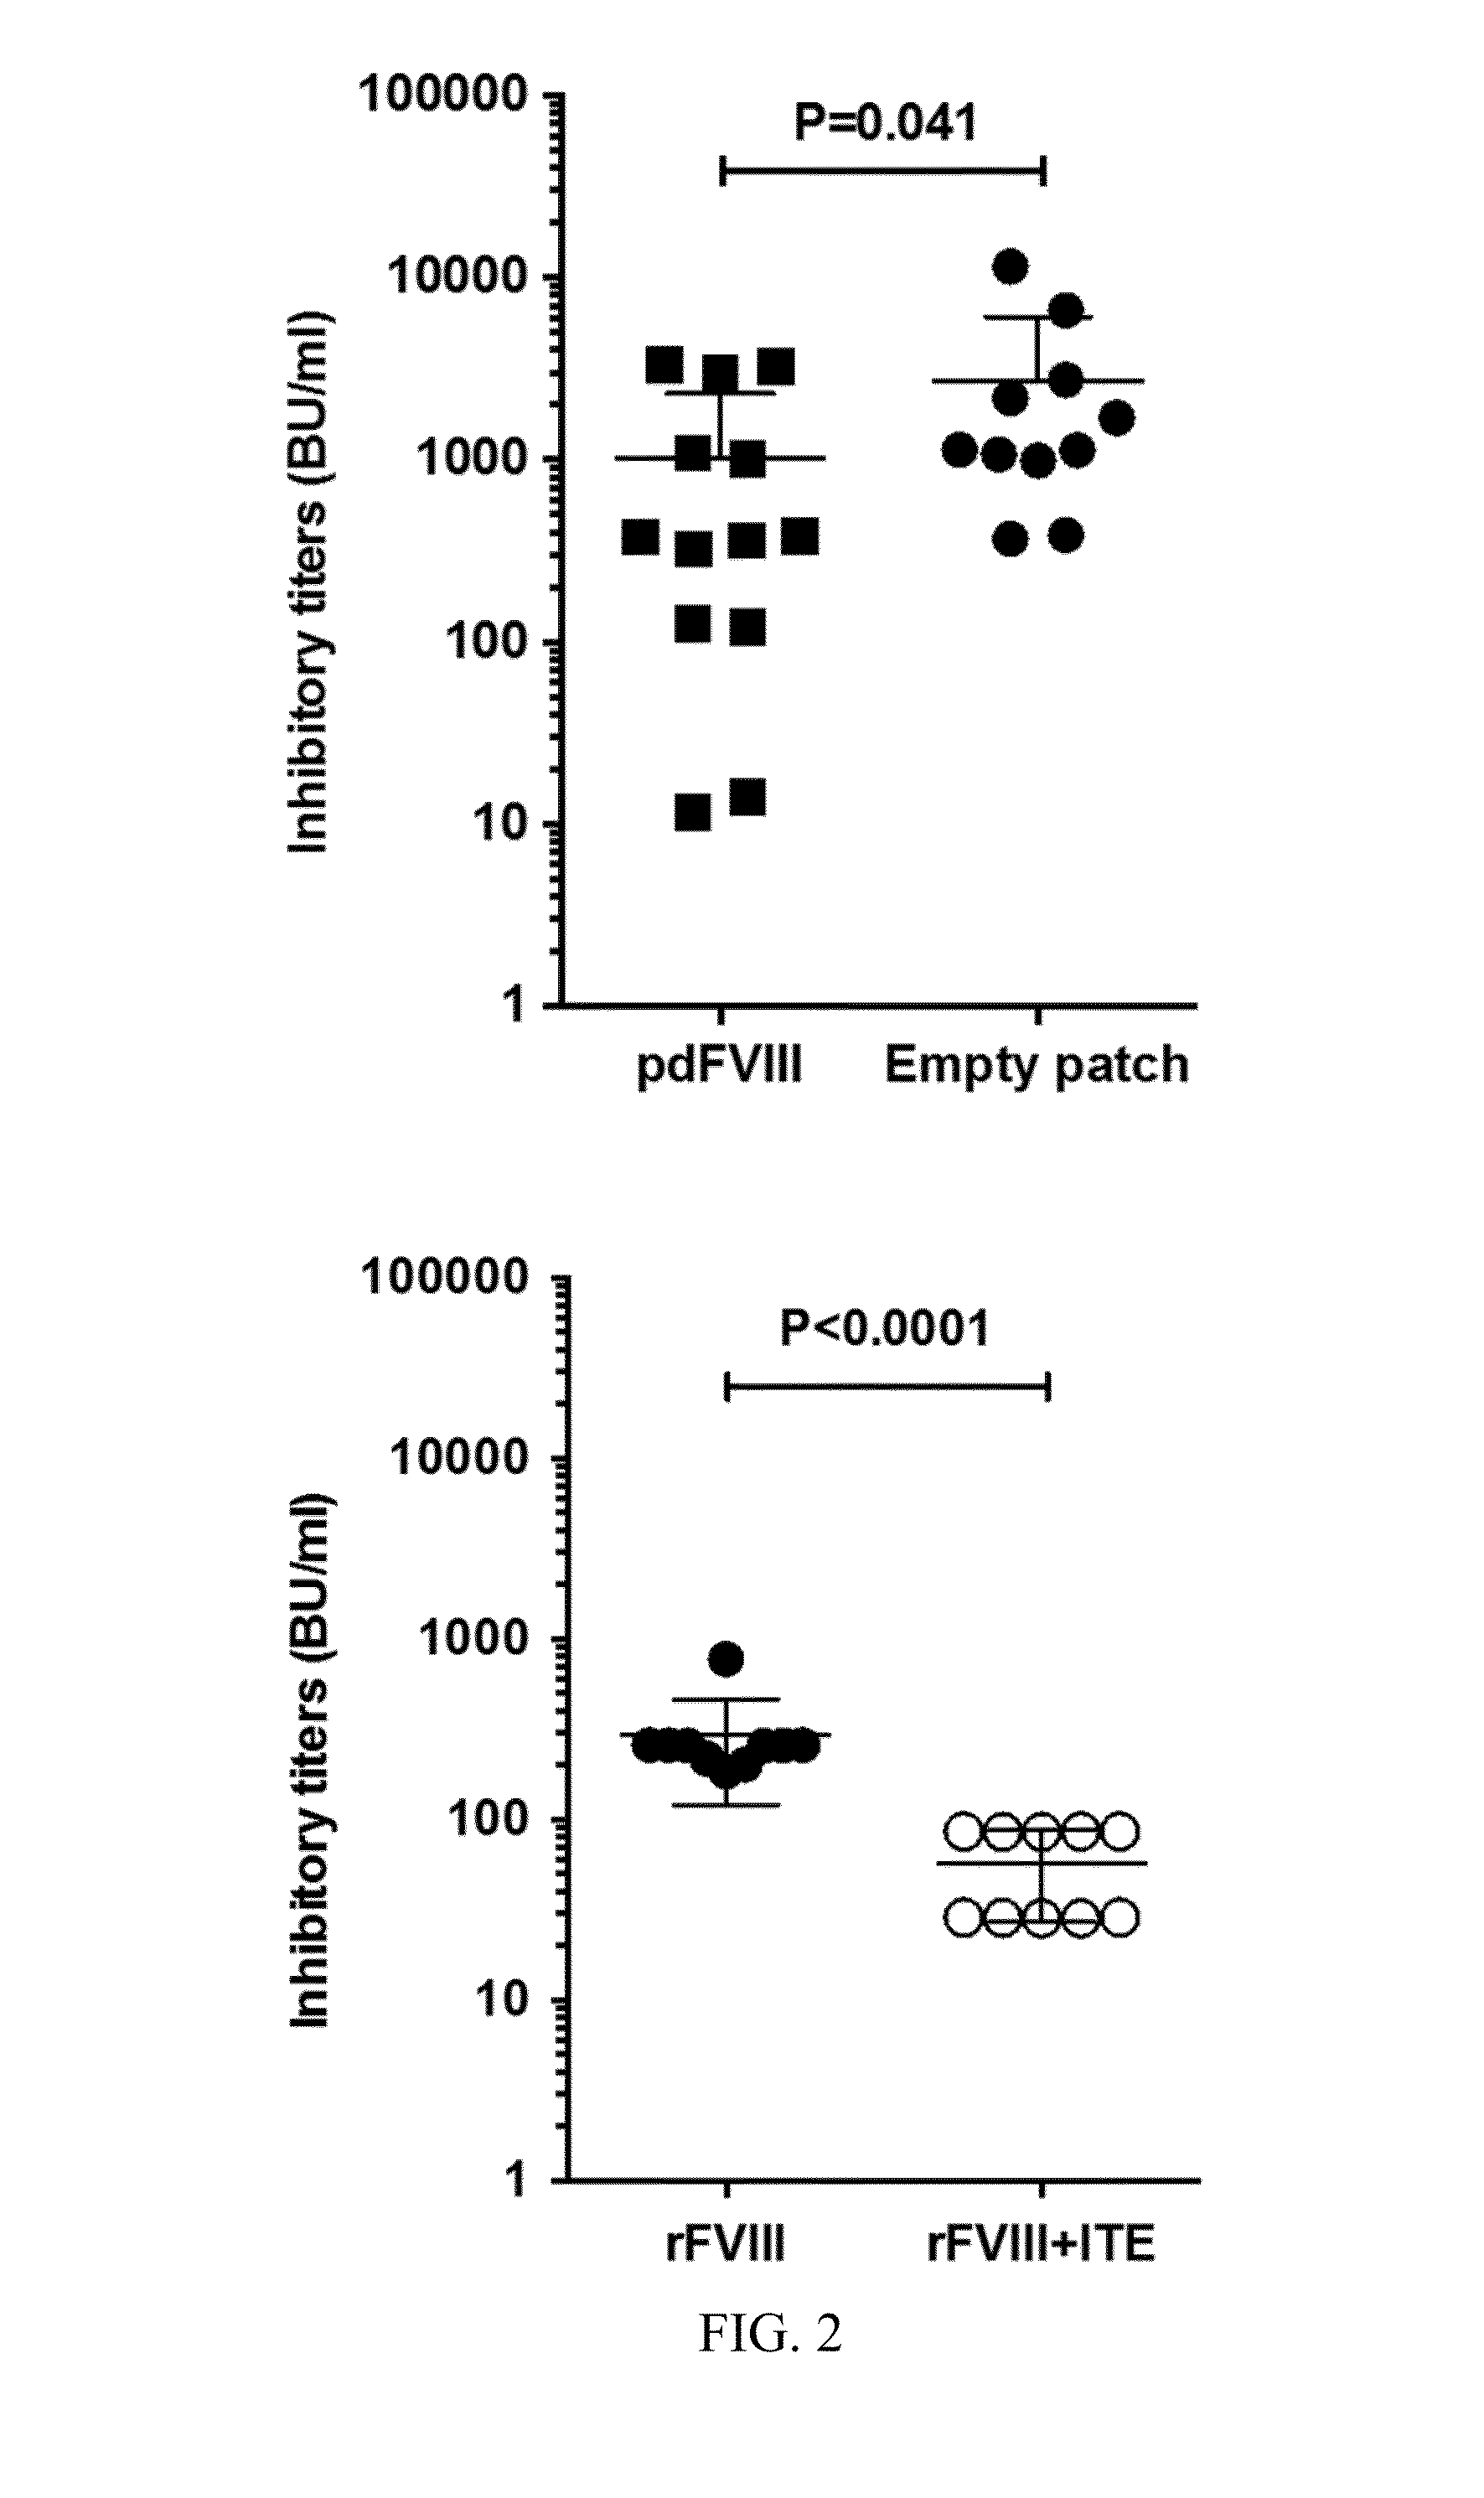 Method of treating haemophilia by inducing tolerance to blood factors